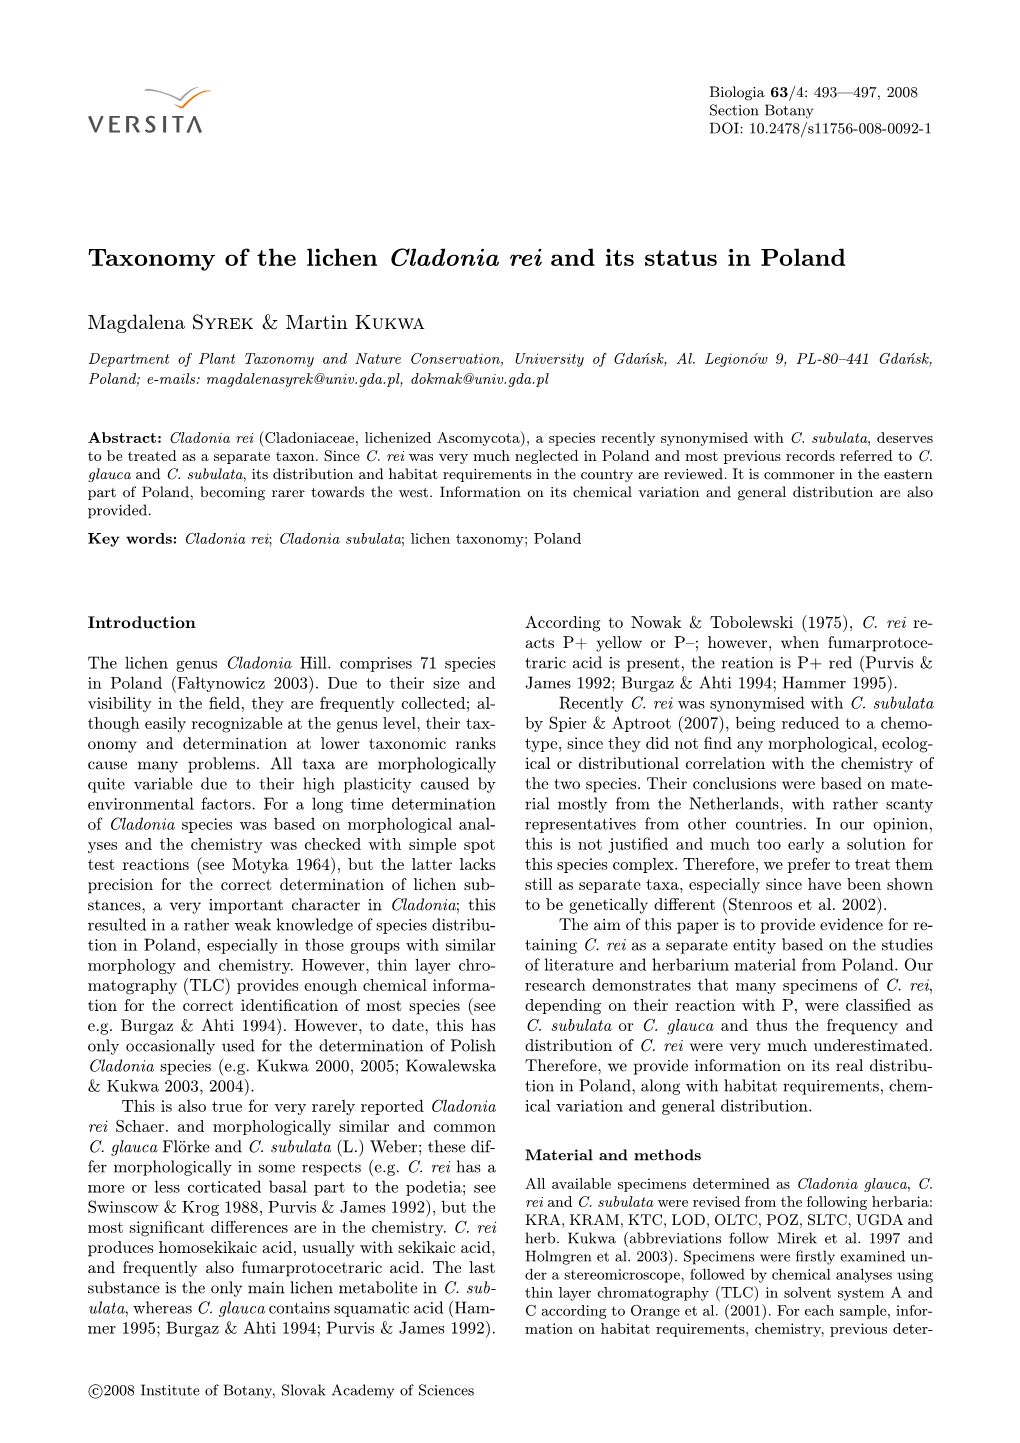 Taxonomy of the Lichen Cladonia Rei and Its Status in Poland